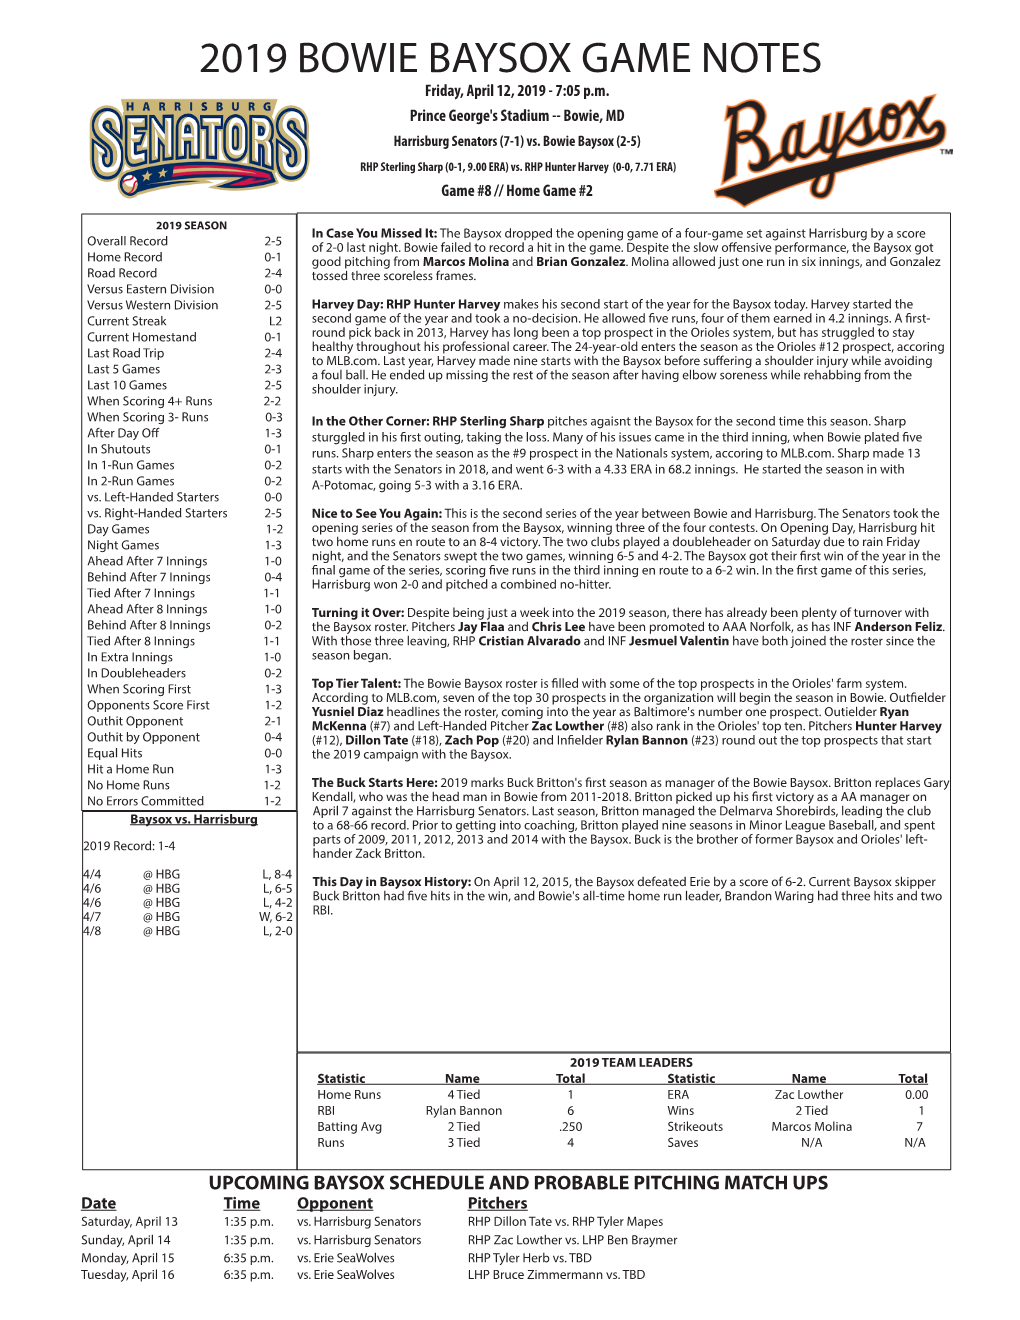 2019 BOWIE BAYSOX GAME NOTES Friday, April 12, 2019 - 7:05 P.M